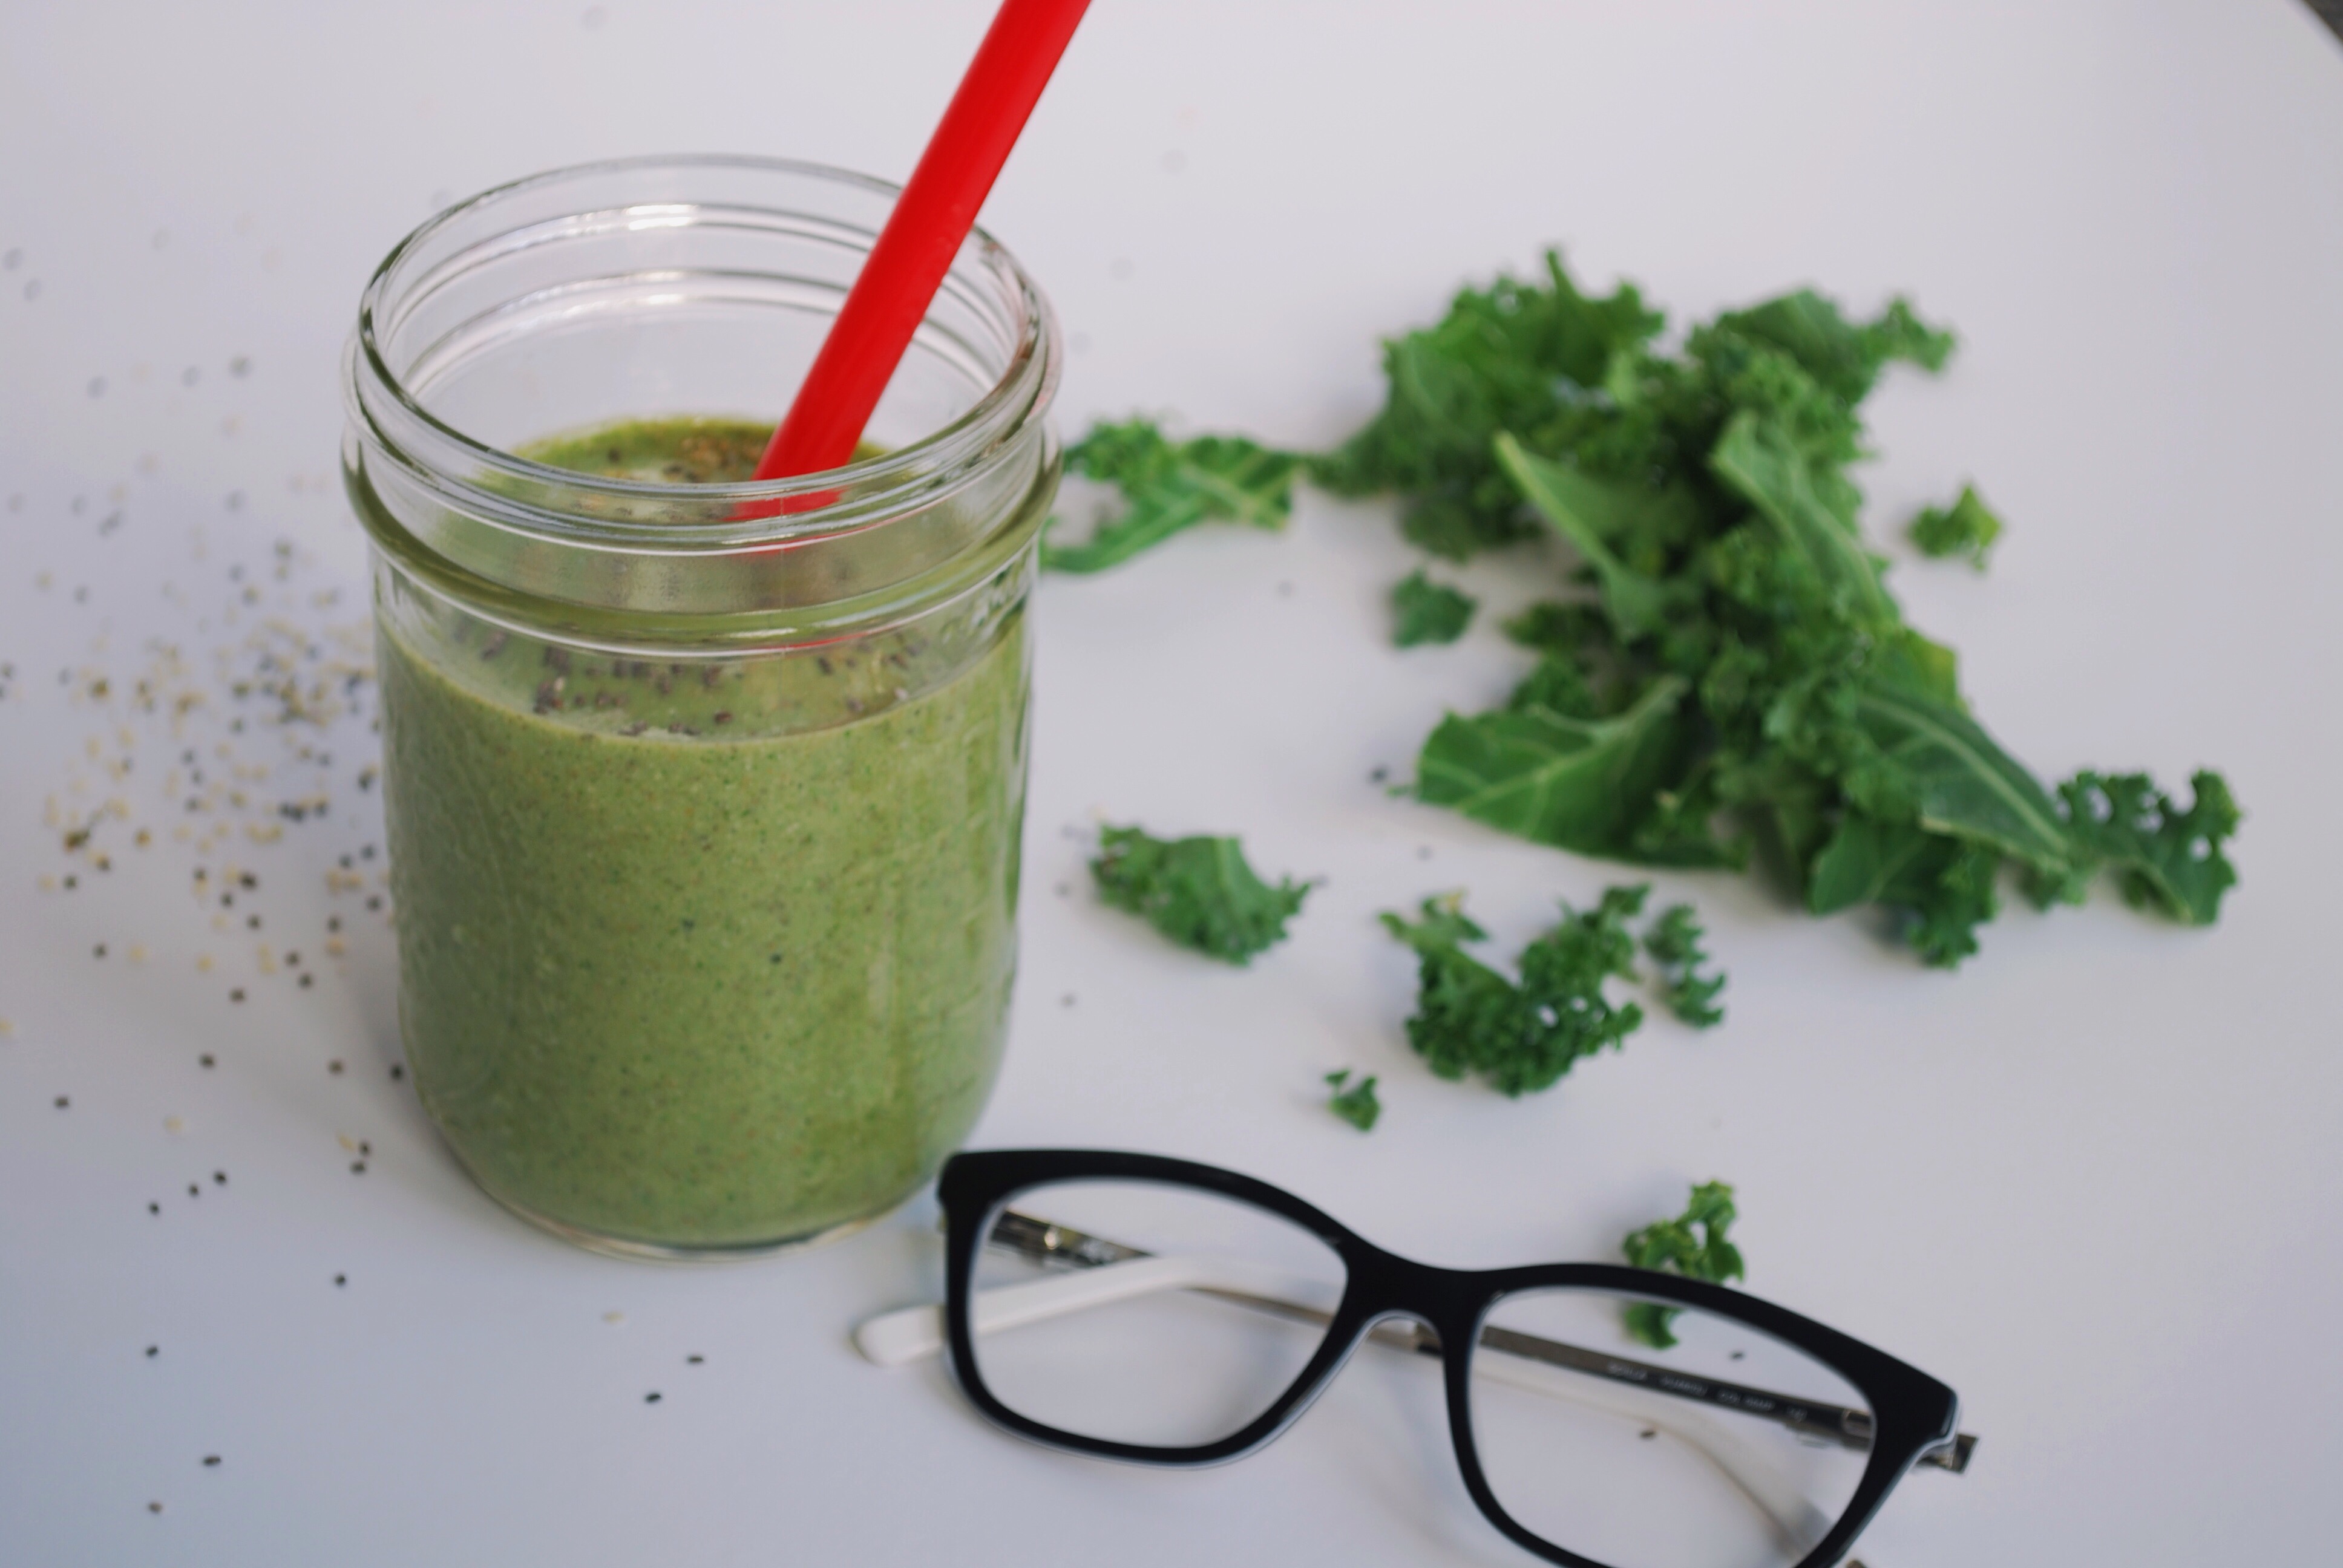 The Hipster's Smoothie: Break out that sense of irony; this vegan and gluten free Hipster Smoothie is full of the healthiest hipster ingredients and 10g of protein for a nutritious morning meal! || fooduzzi.com